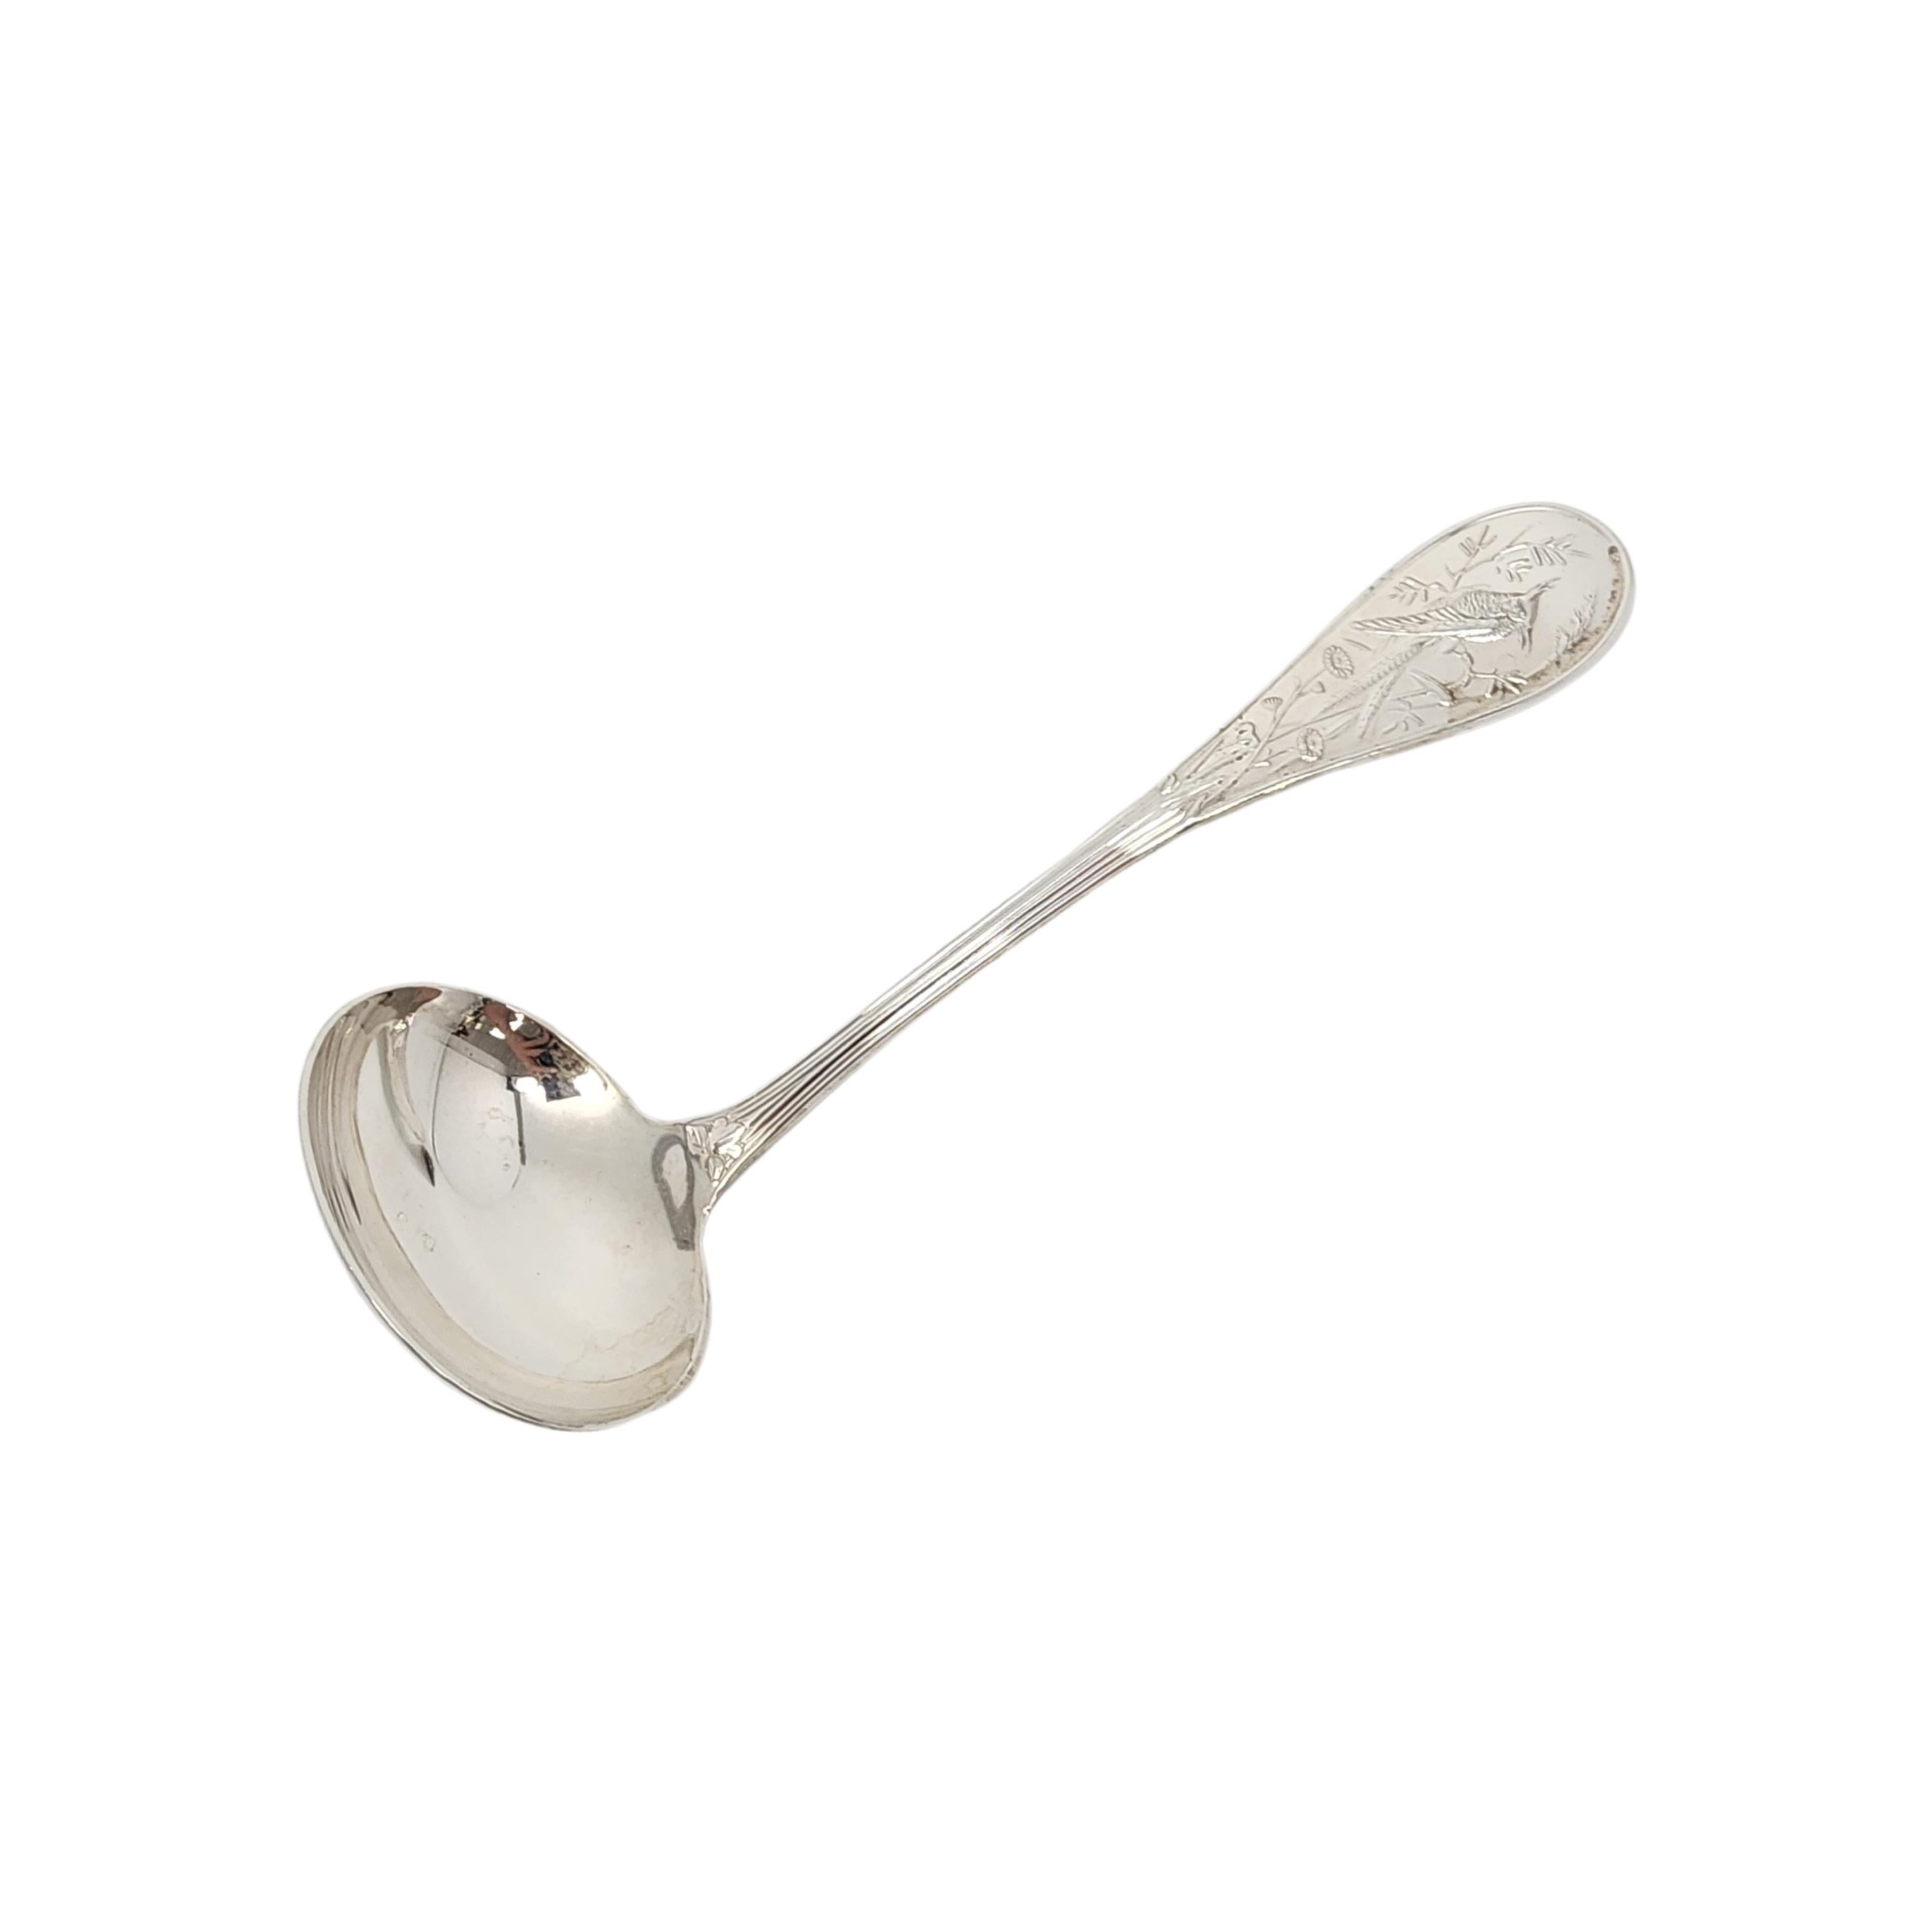 Sterling silver gravy ladle by Tiffany & Co in the Audubon pattern with pouch.

No monogram

Designed by Edward C. Moore in 1871, the Audubon pattern was inspired by Japanese bird paintings of the 19th century. This ladle features a larger oval